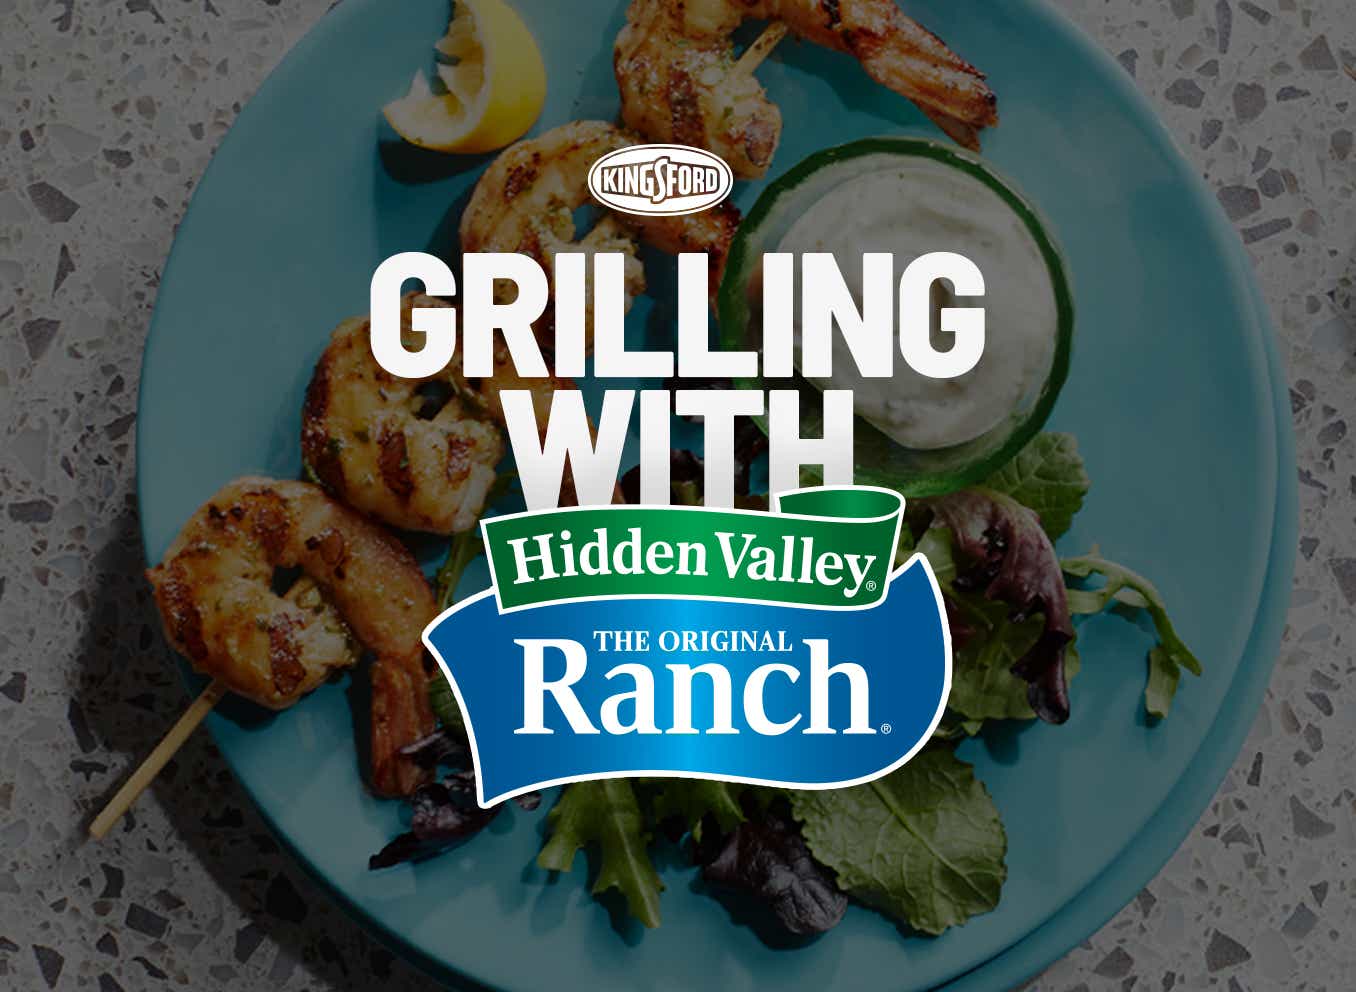 Grilling with Ranch